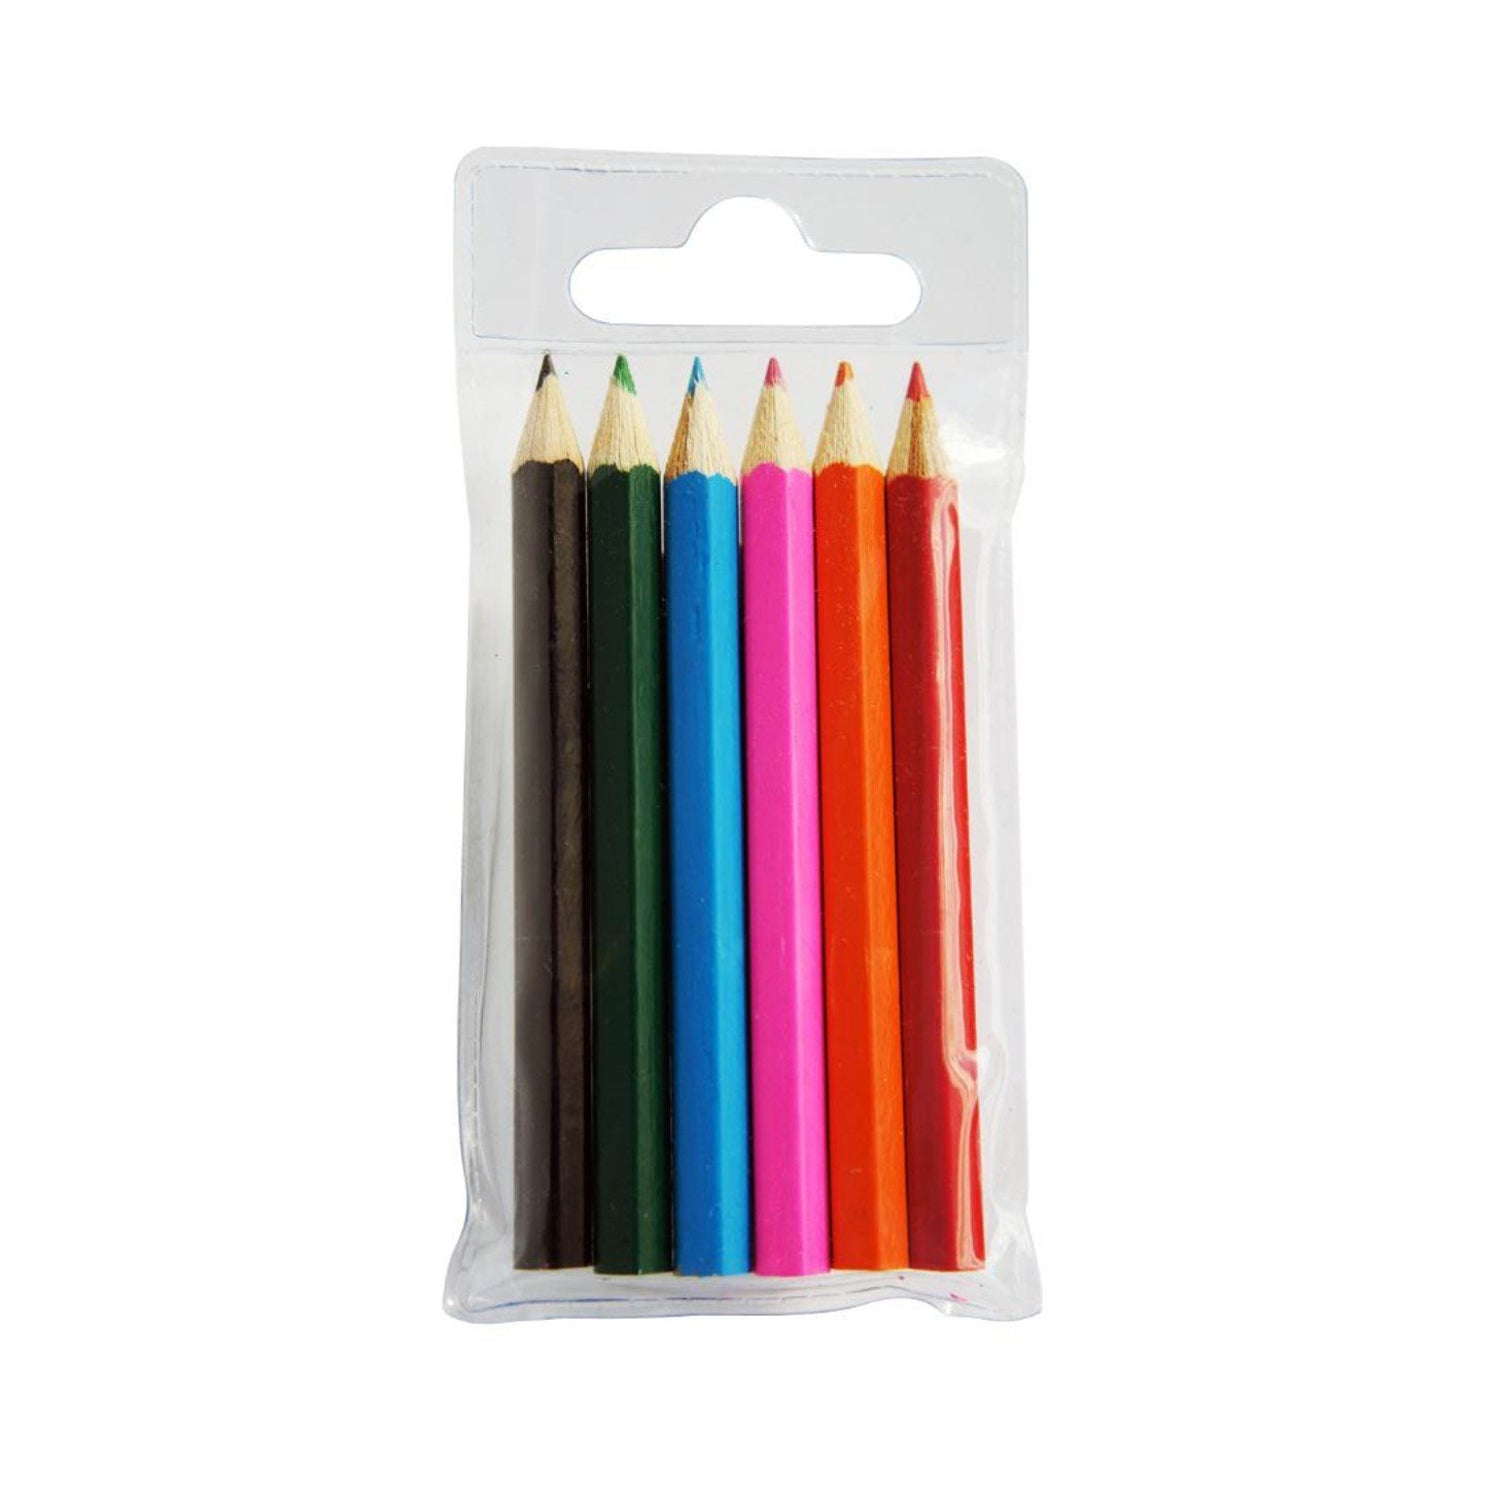 6 pack half size sharpened colouring in pencils Bulk Lot 100, 250, 500 or 1000 -